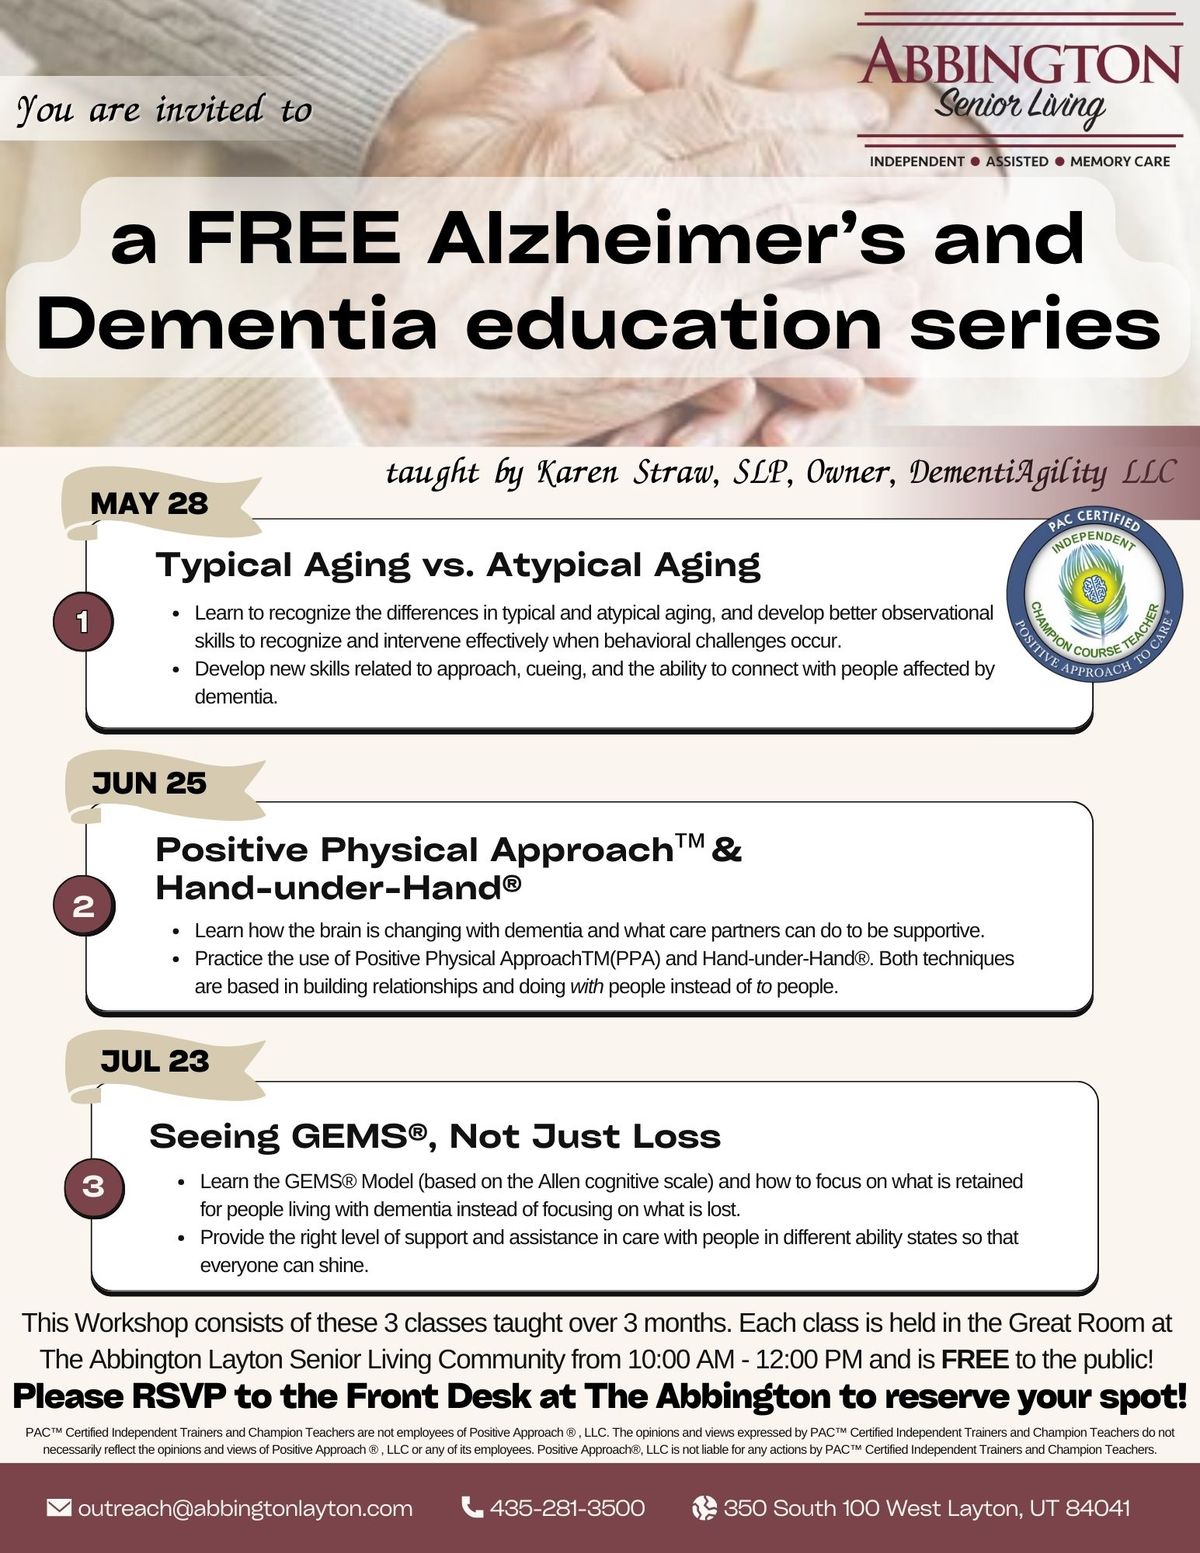 FREE Alzheimer's and Dementia education series